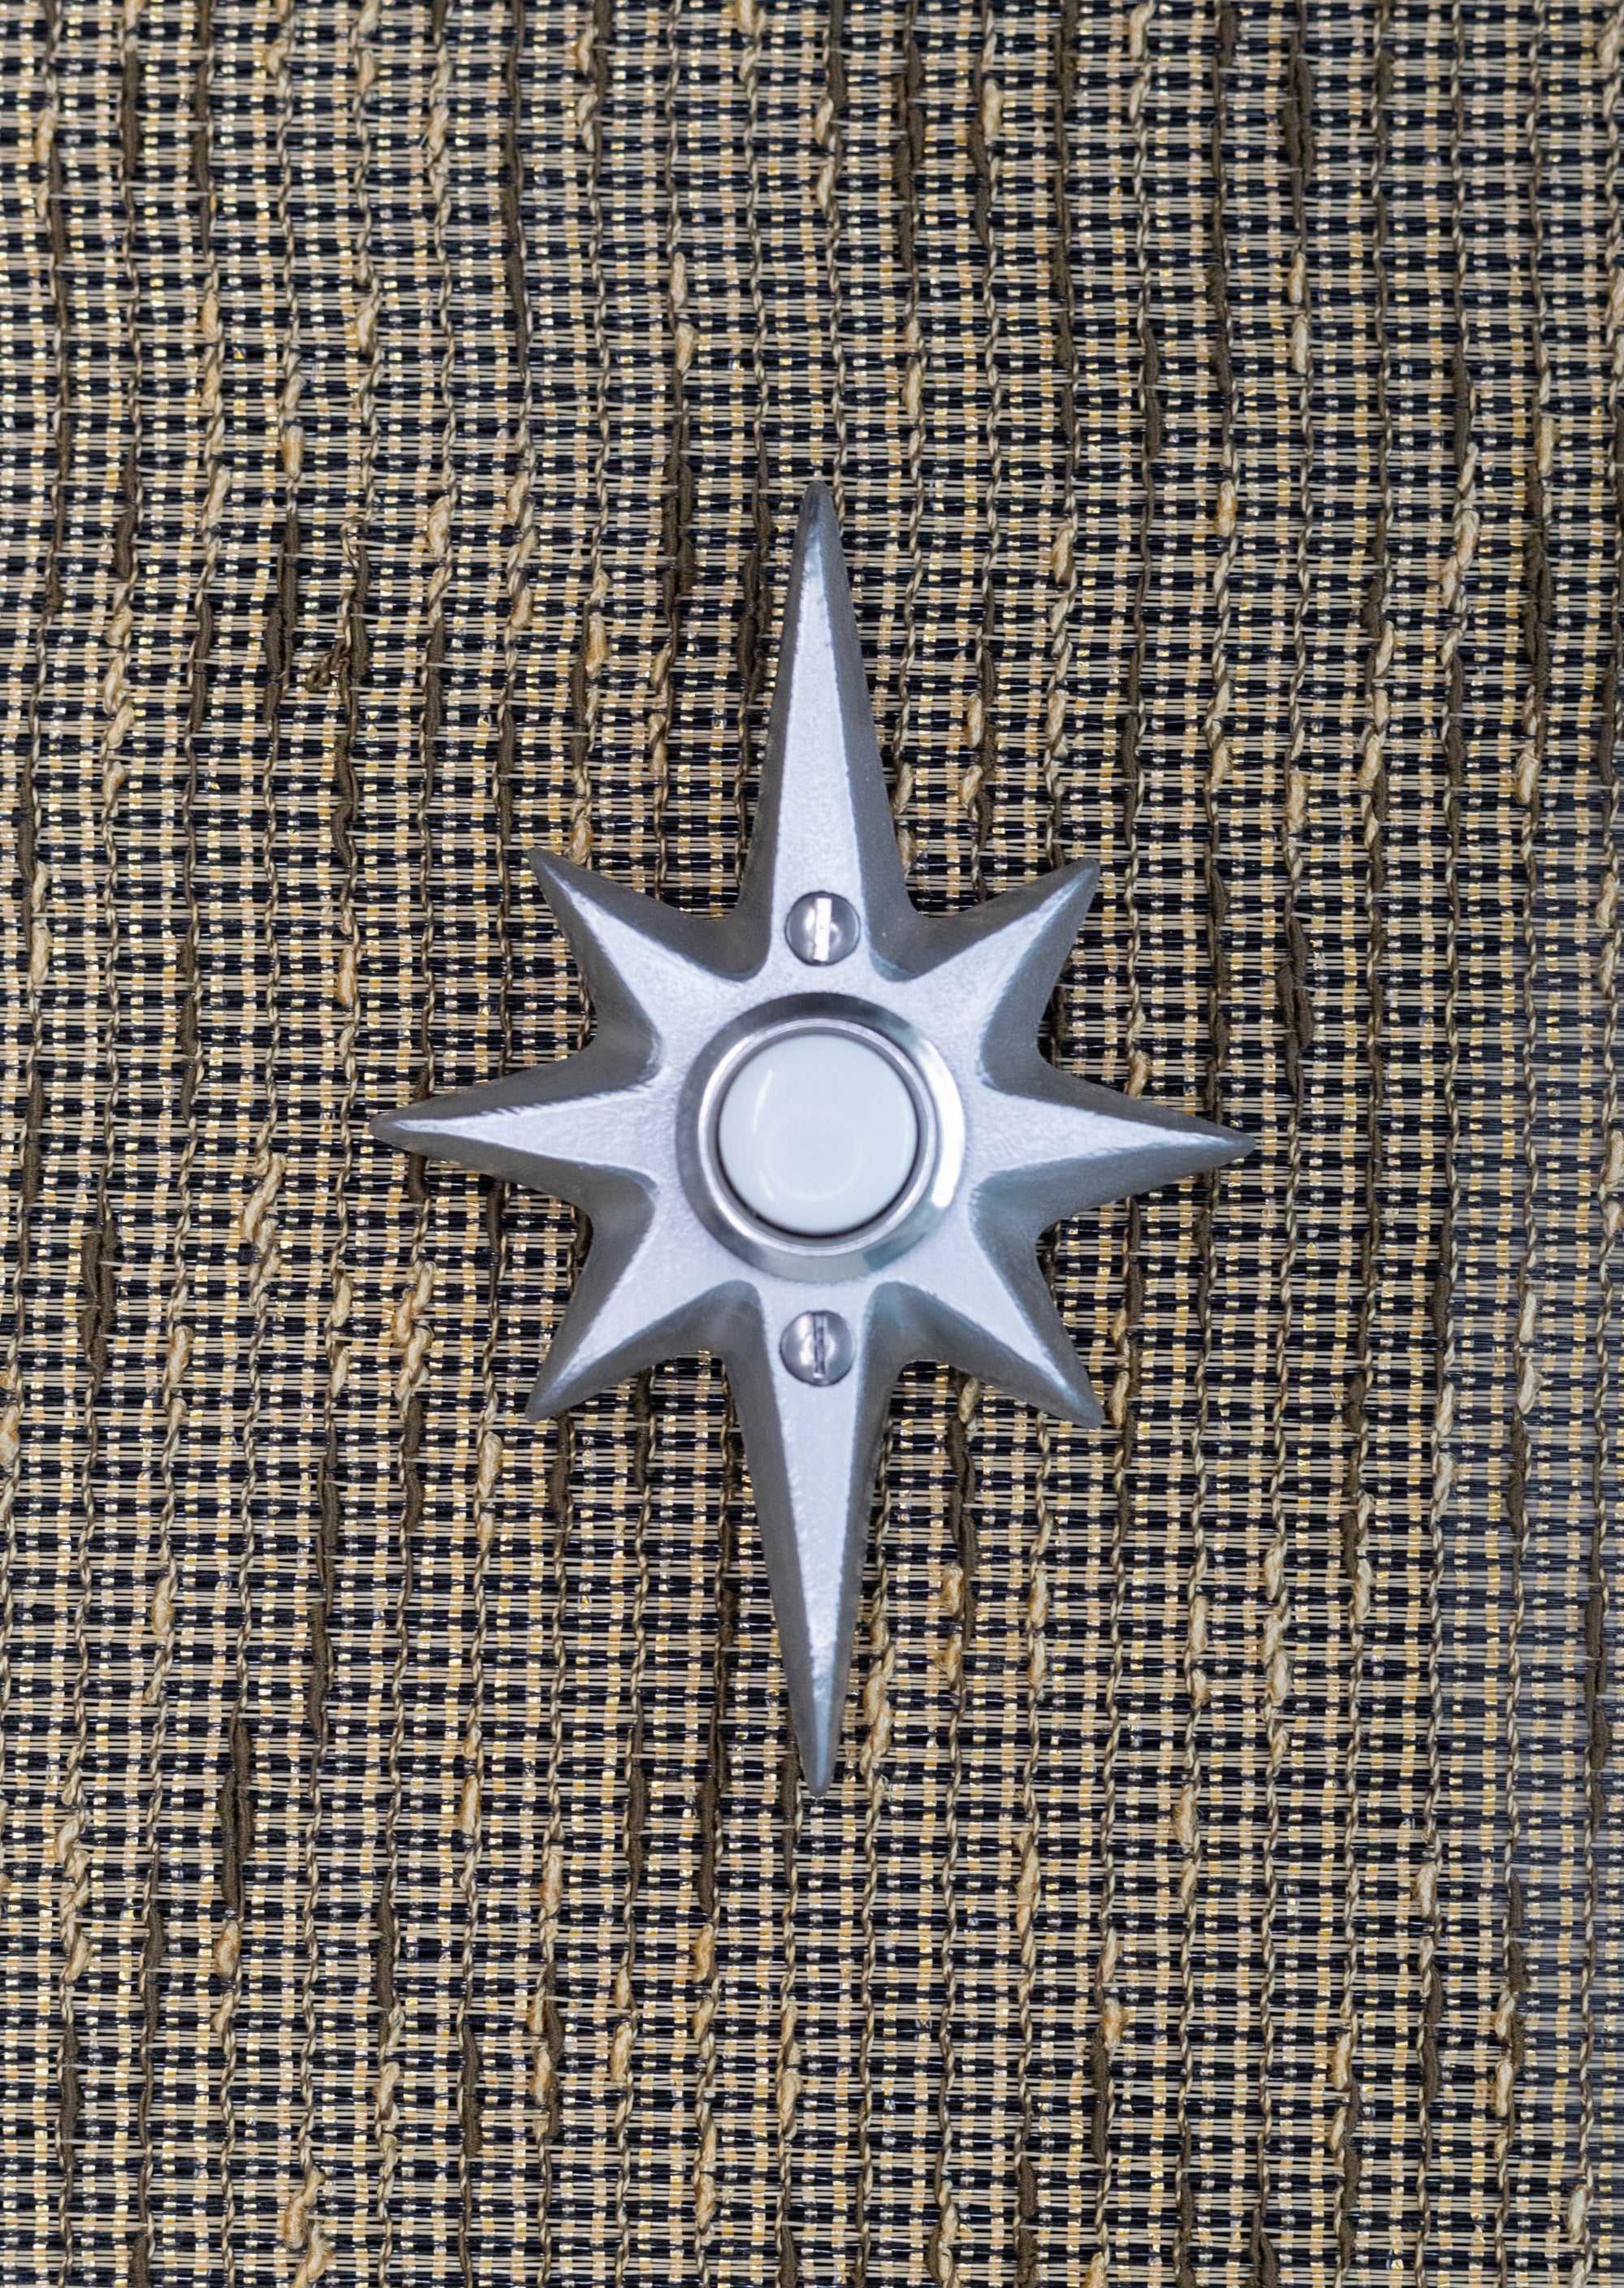 A small natural cast aluminum starburst doorbell. The natural aluminum has a small bit of porous texture to it, but is still very smooth and reflects the light. There are two silver screws, one above and below the doorbell in the center.